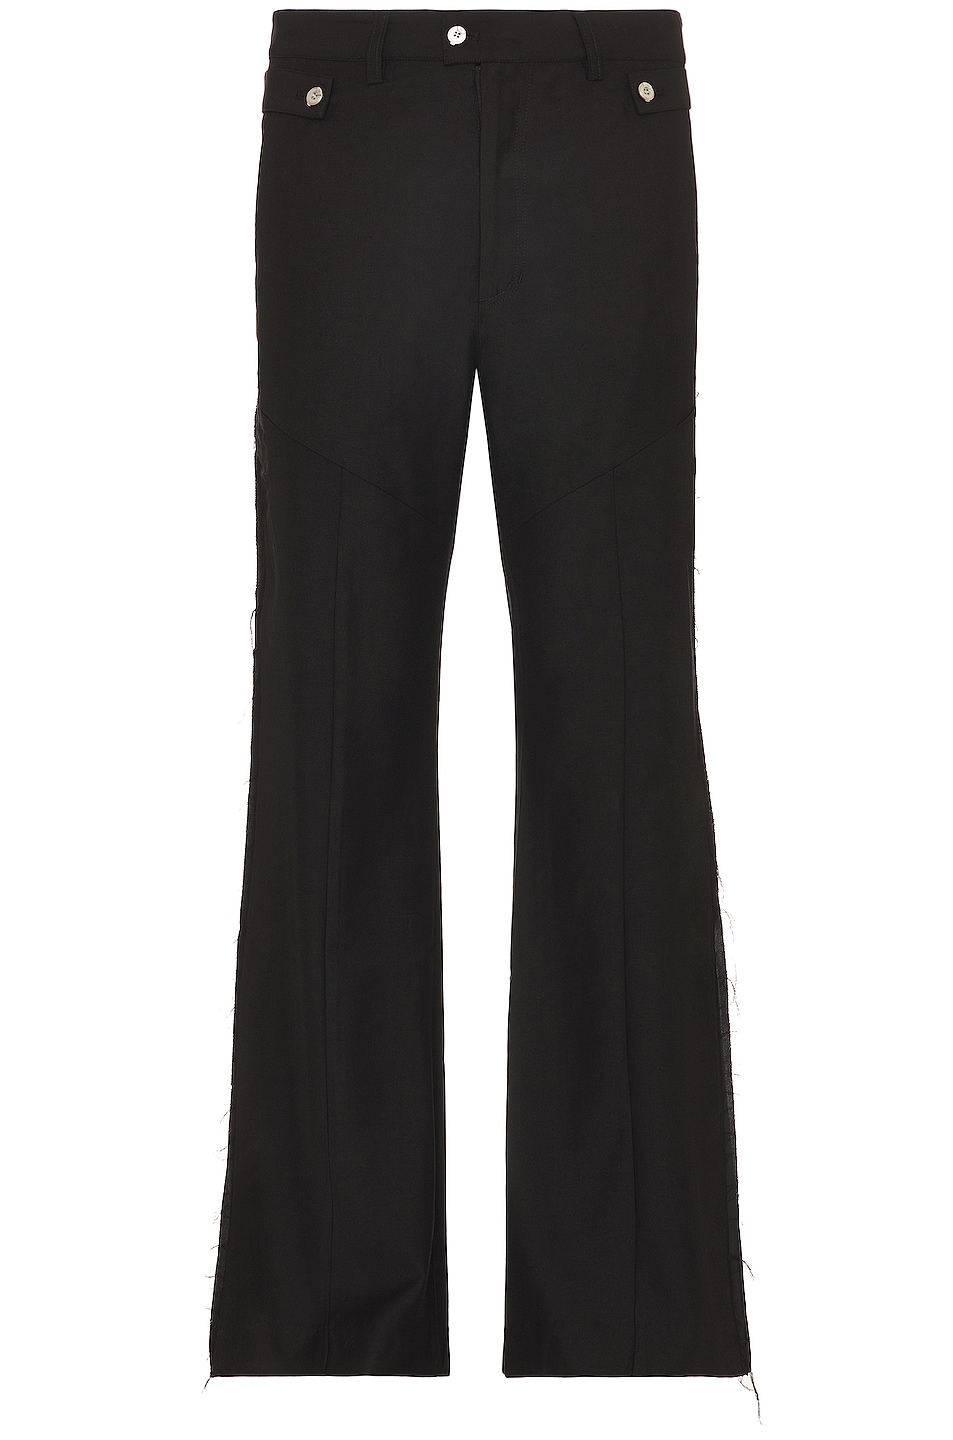 Image 1 of C2H4 Multi Pockets Flared Trousers in Solemn Black